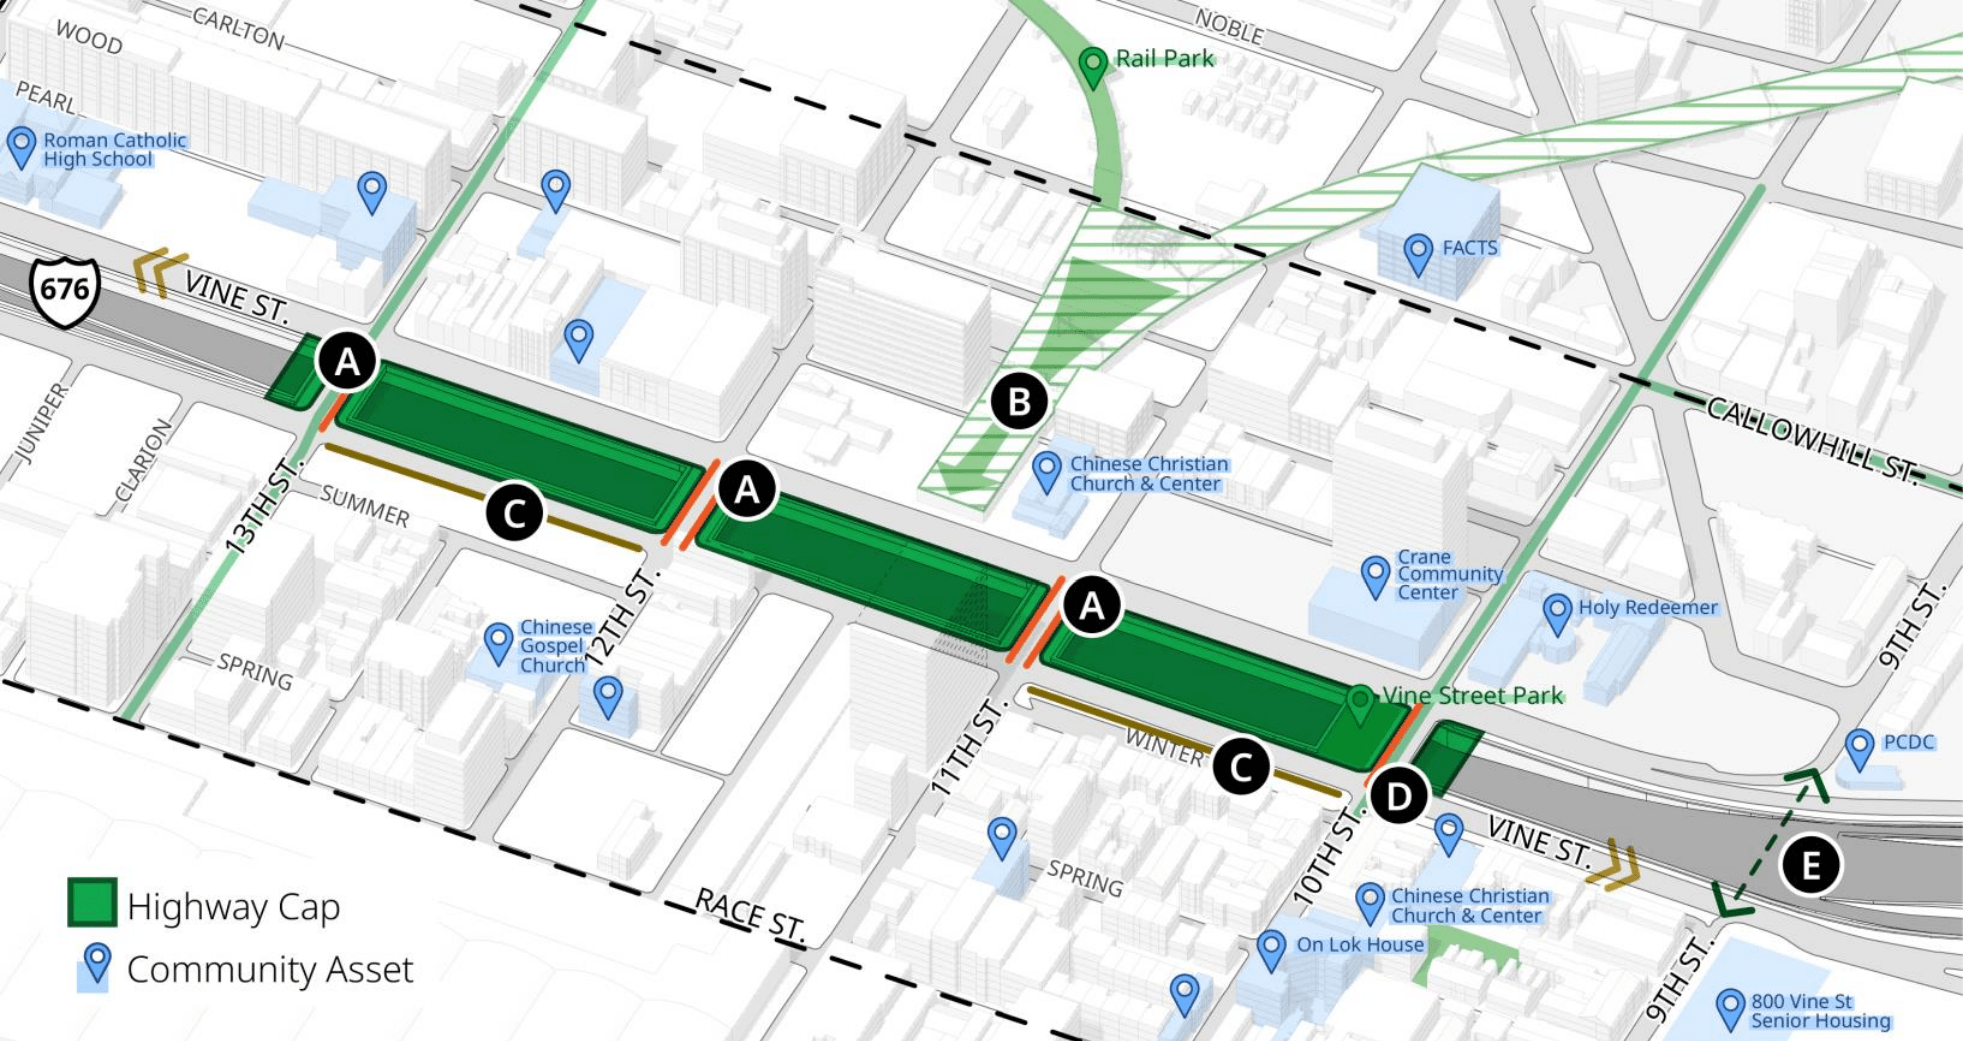 The three block cap concept for Philadelphia's Chinatown includes A) active spaces along north-south cross streets, B) a potential rail park connection, C) removed sound barrier wall for wider sidewalks, D) an improved key intersection and E) an exploration into improved pedestrian connection.